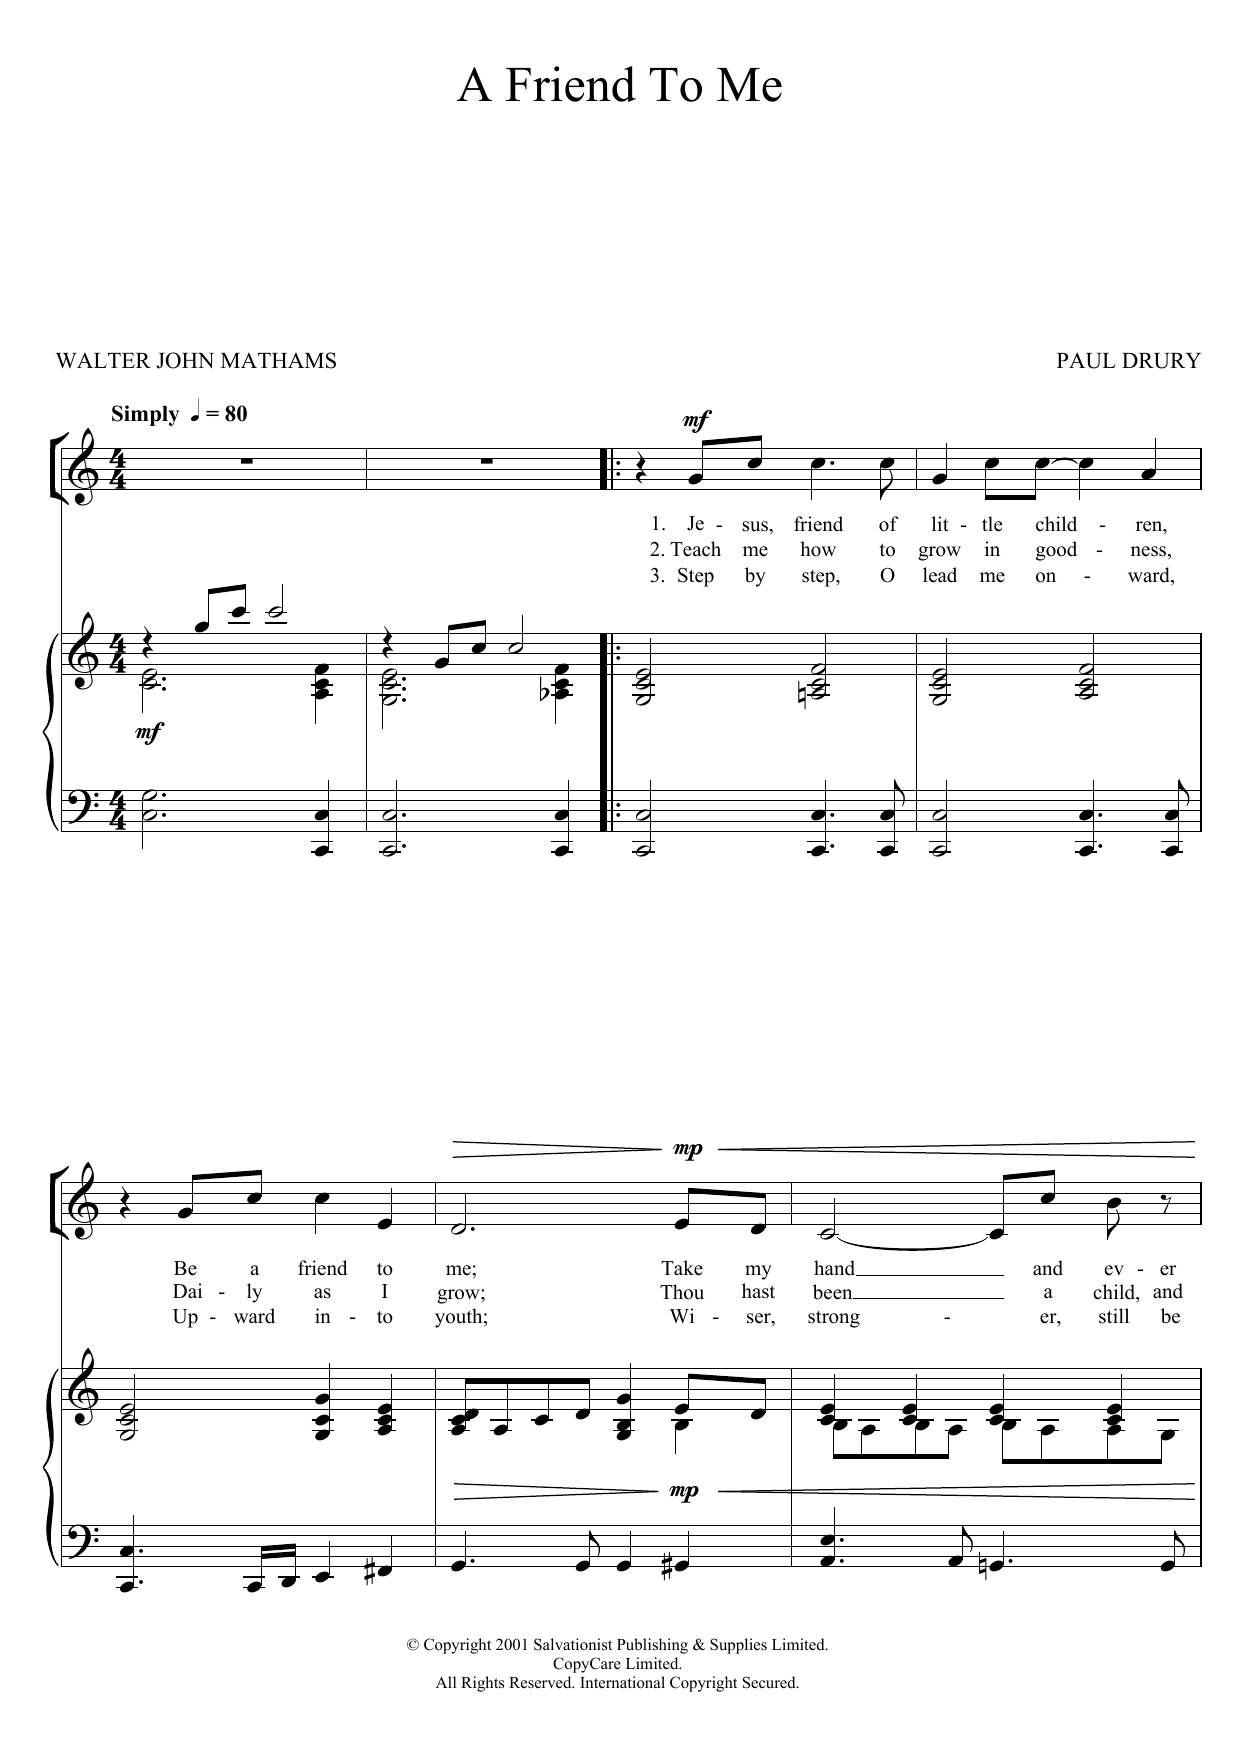 Download The Salvation Army A Friend To Me Sheet Music